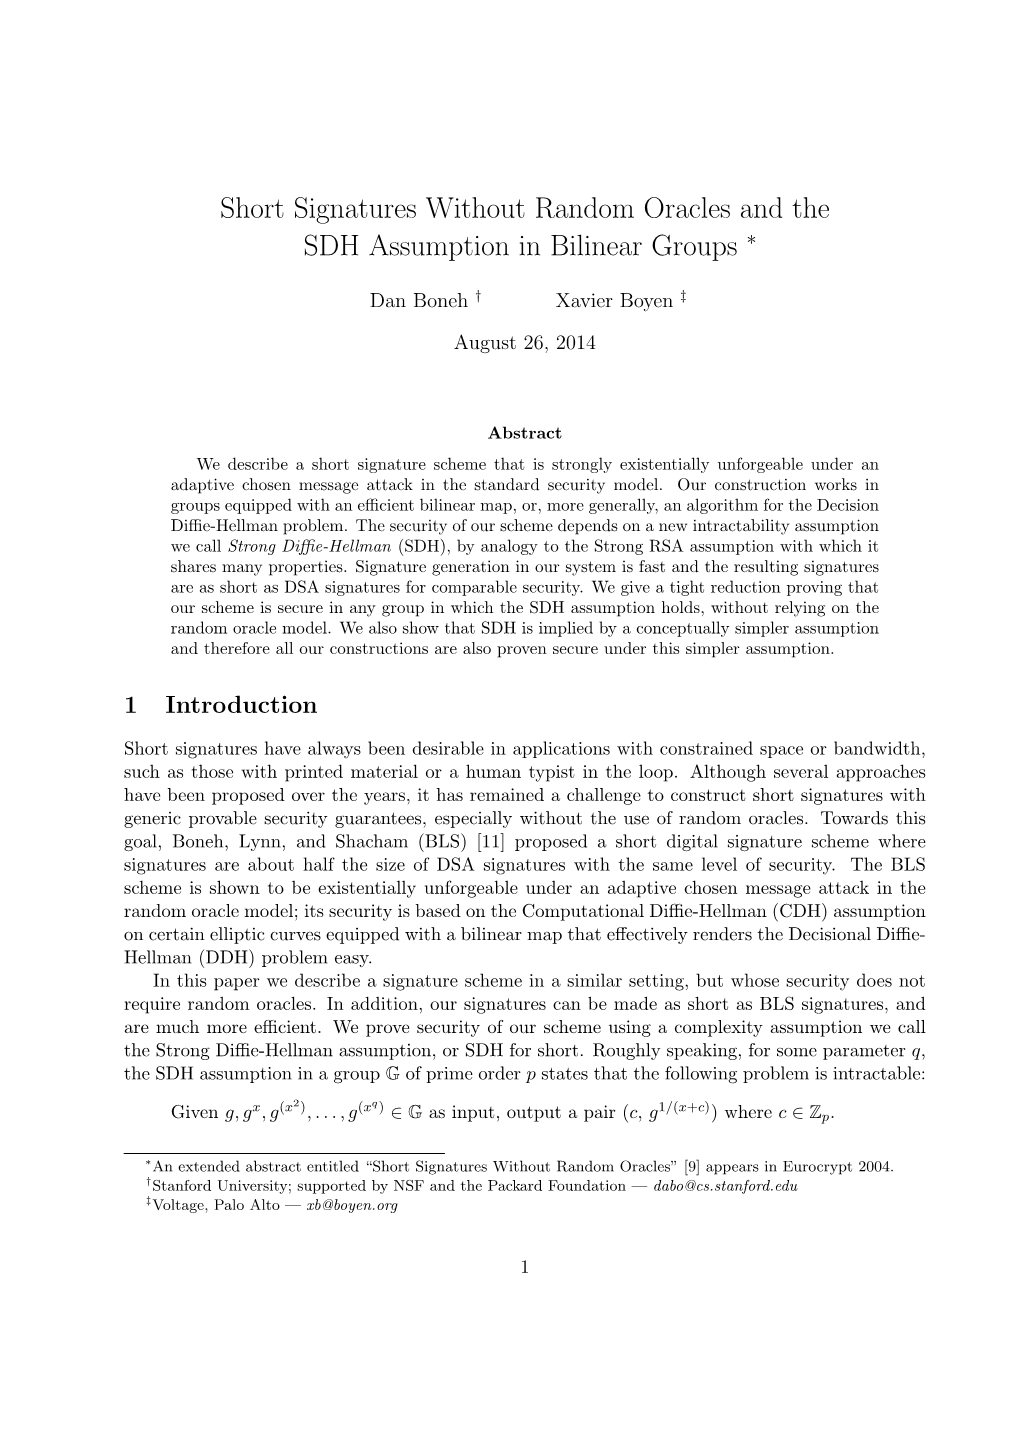 Short Signatures Without Random Oracles and the SDH Assumption in Bilinear Groups ∗